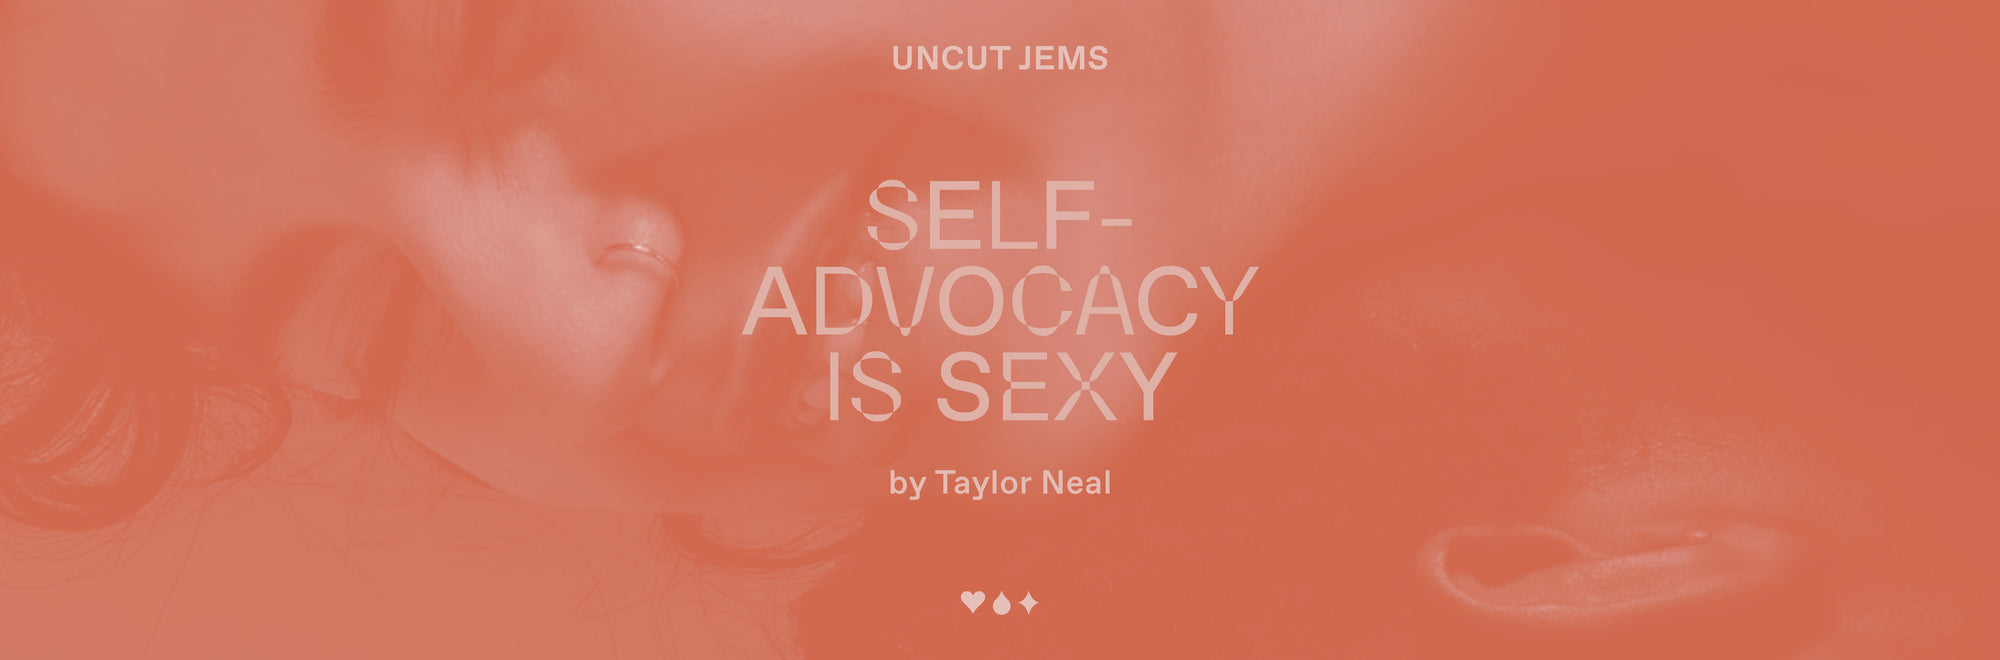 Uncut Jems: Self-Advocacy is Sexy